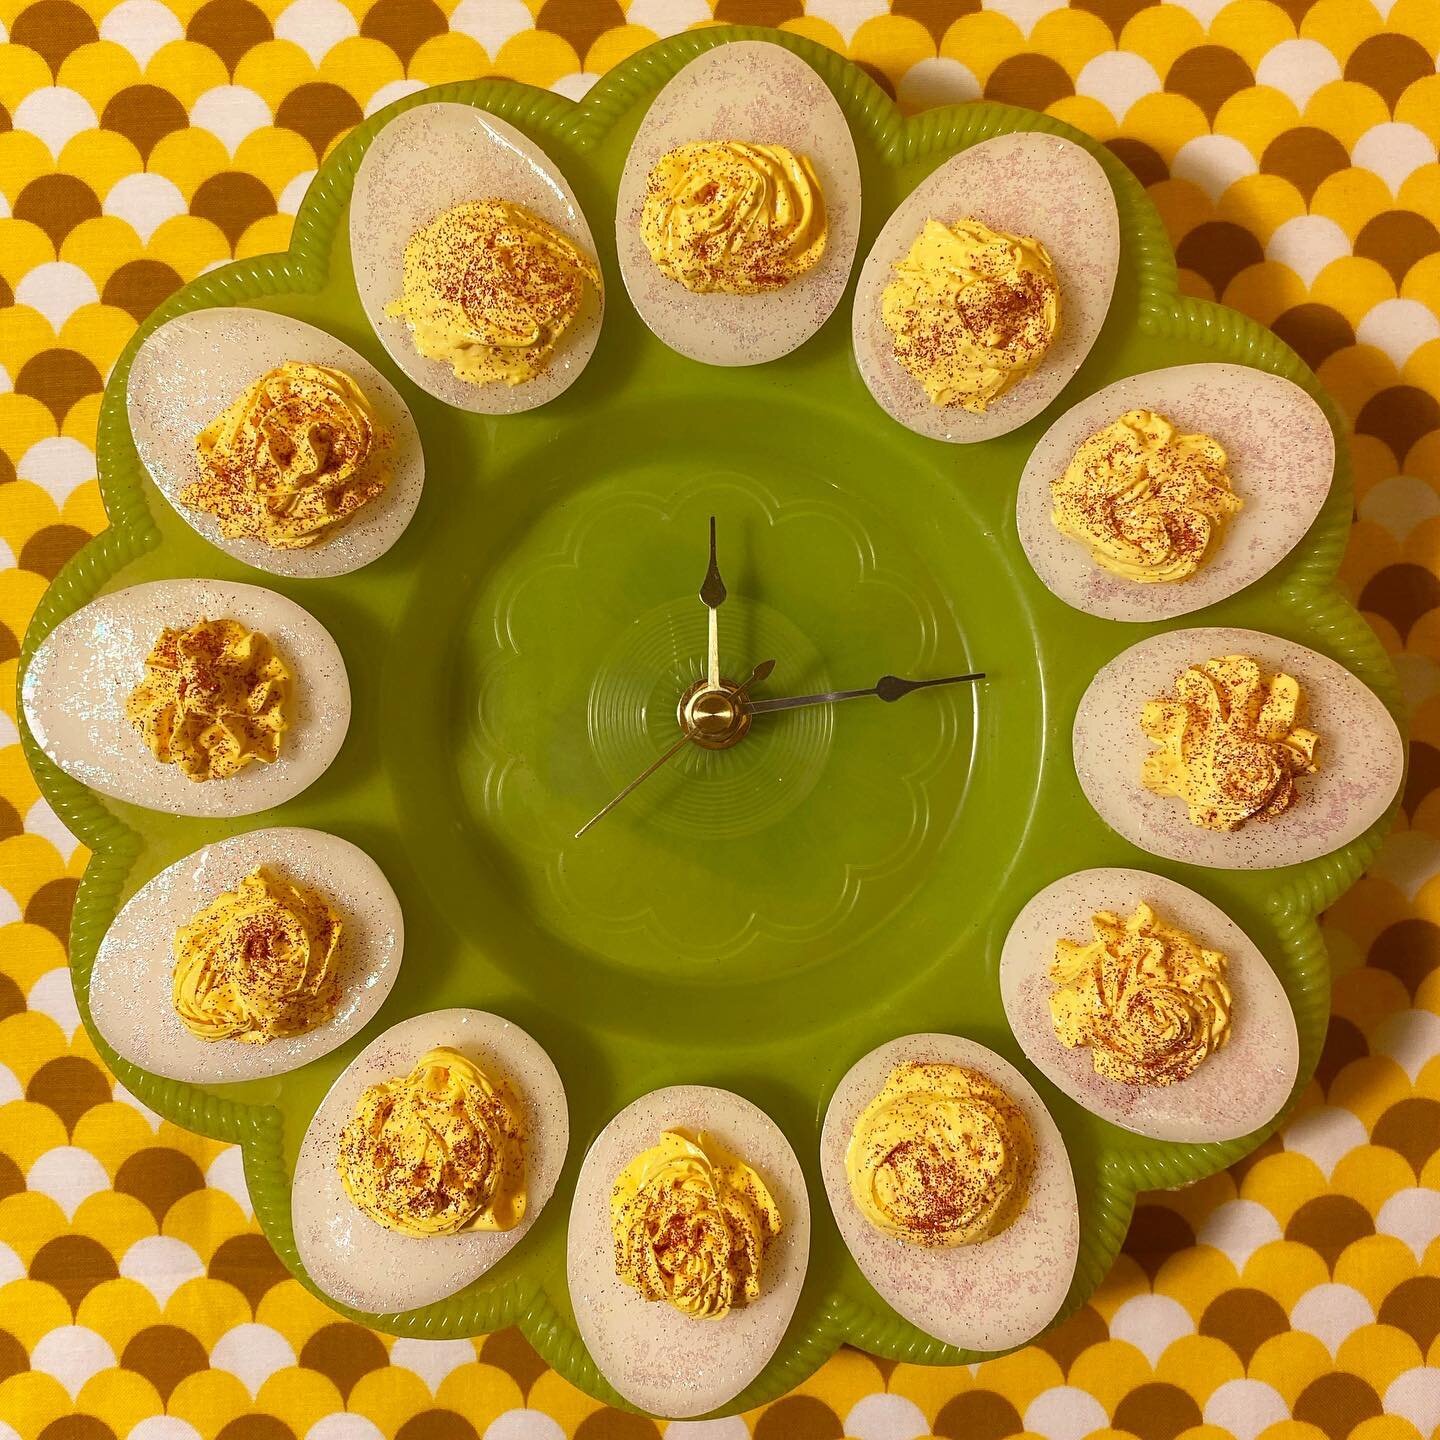 *SOLD* You can&rsquo;t throw a dinner party and NOT offer Deviled Eggs as an appetizer.... you just CANNOT. Which is why, even though it doesn&rsquo;t fit the theme of &ldquo;gelatin&rdquo;, it&rsquo;s still absolutely necessary that I share this dis